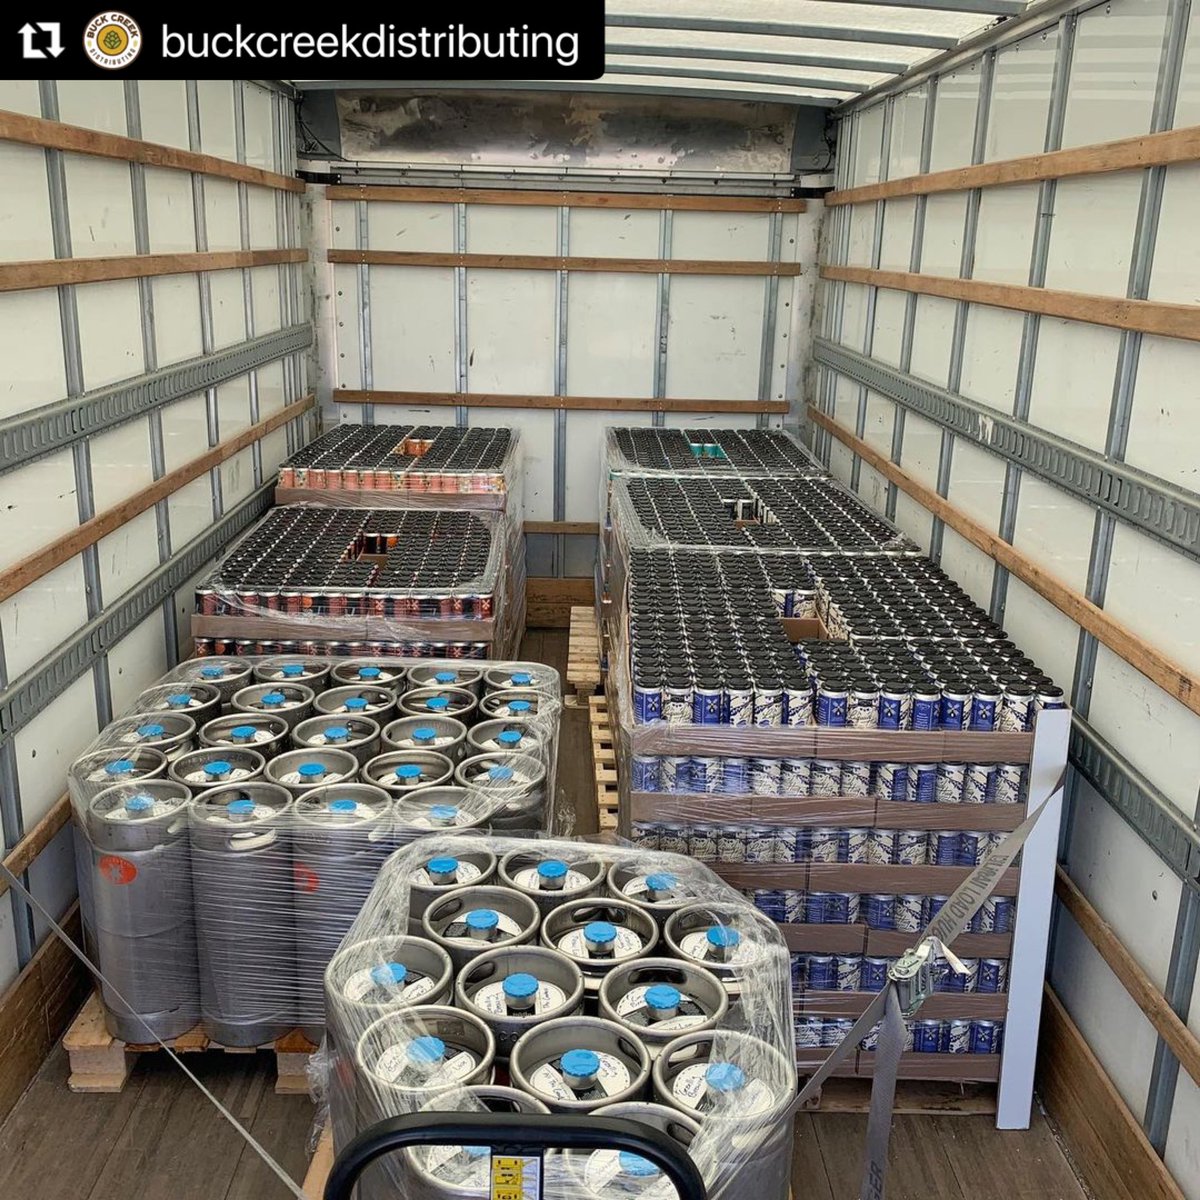 That’s a lot of Gezellig beer being moved out to @ConfluenceBrew for distribution all over Central & Eastern Iowa!

#gezelligtimes #distribution #iowabeer #iabeer #gezellig #newtoniowa #brewery #smallbrewery #microbrewery